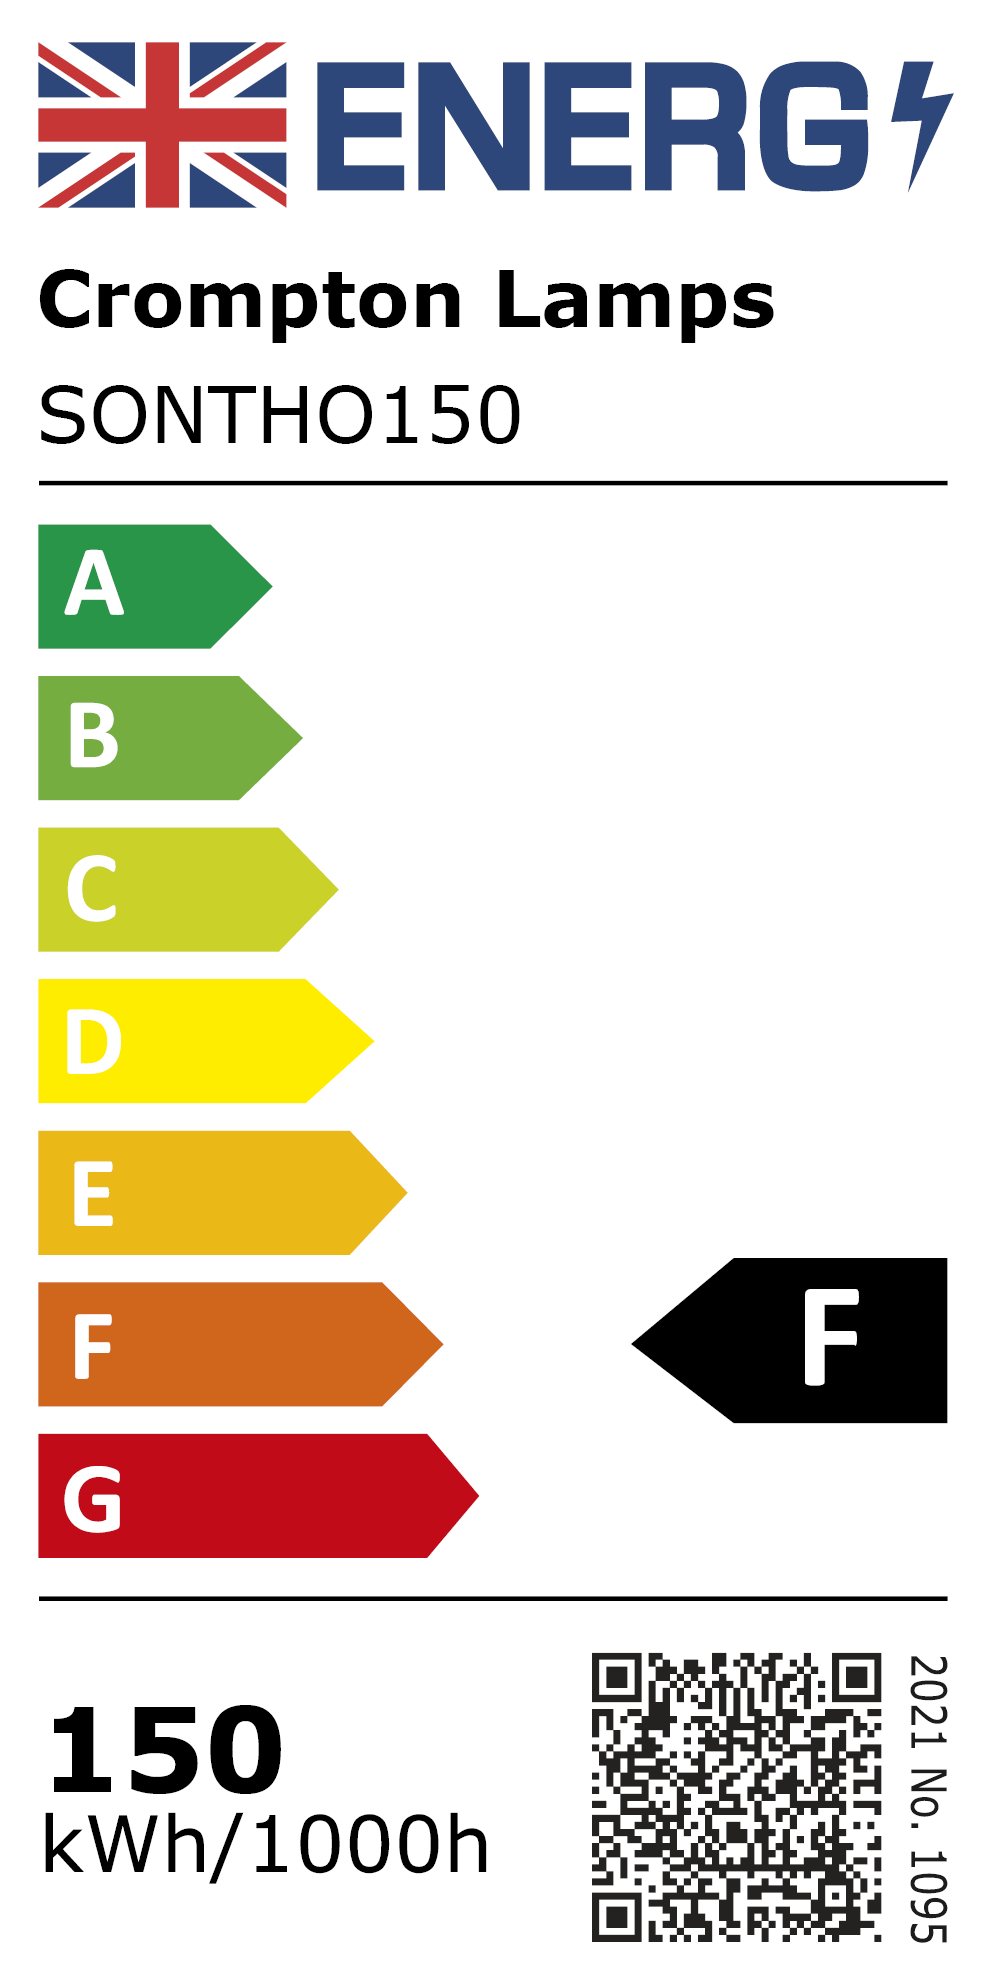 New 2021 Energy Rating Label: Stock Code SONTHO150